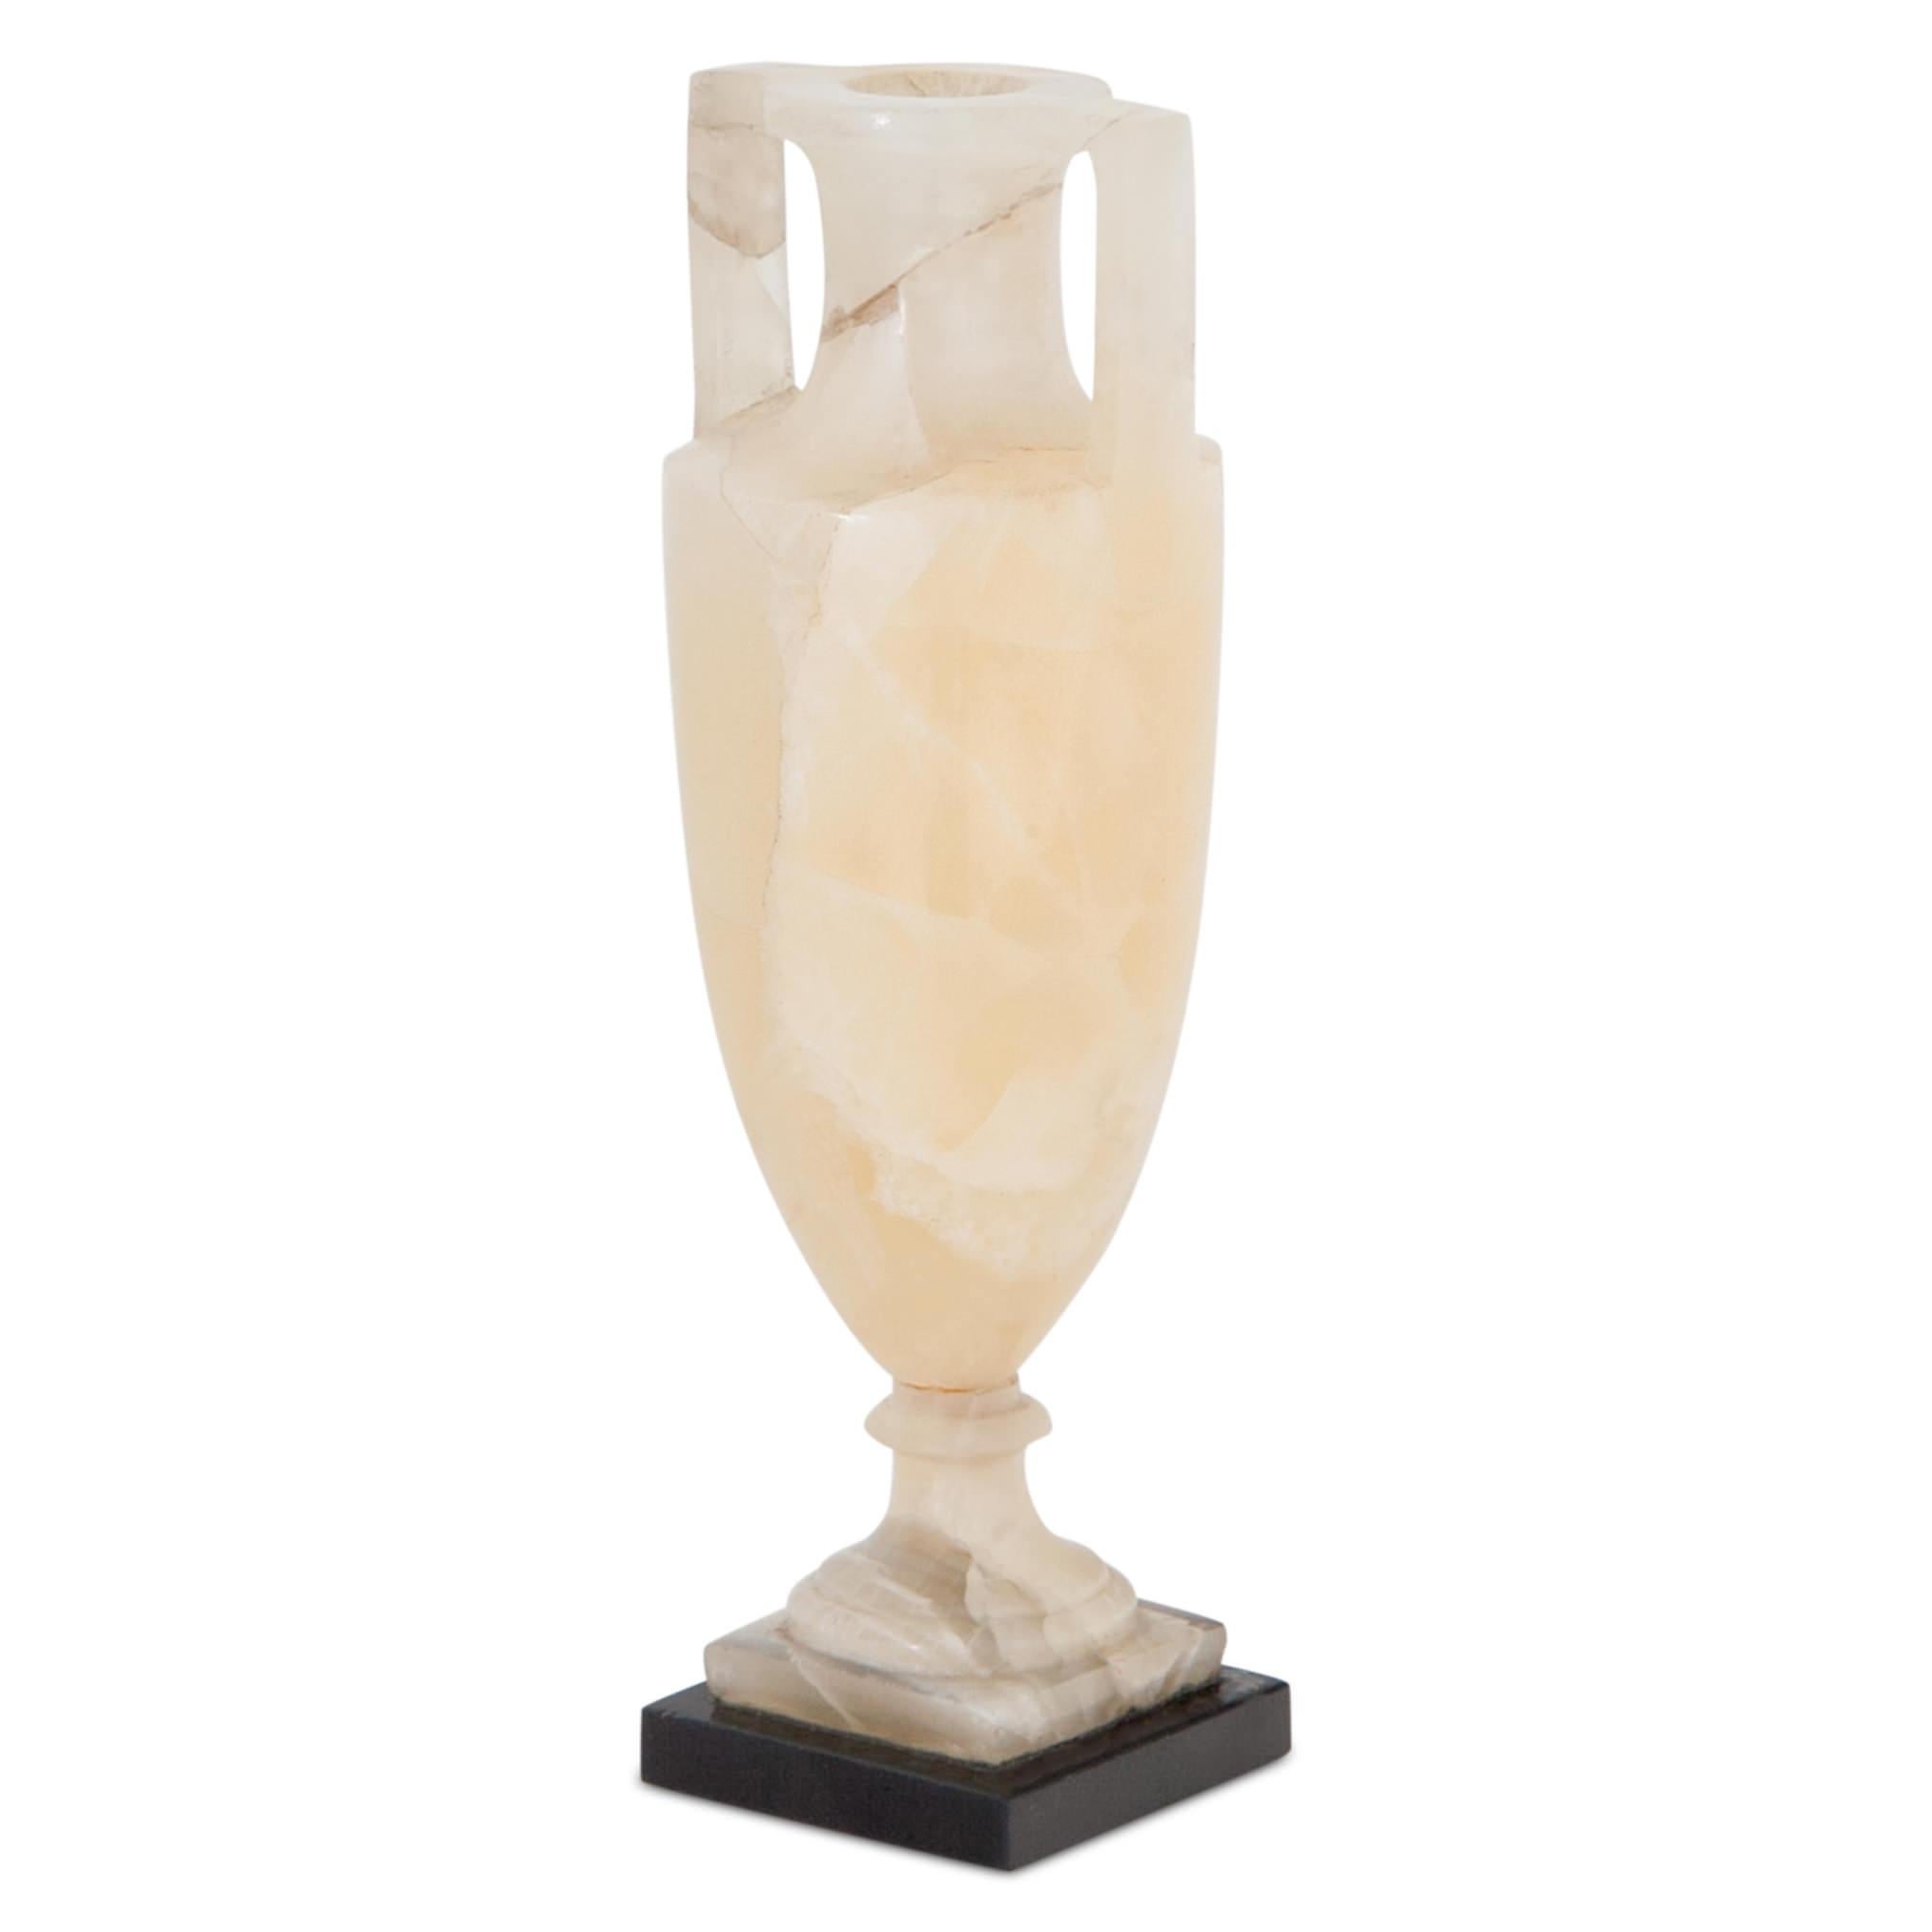 Small amphora out of light yellow alabaster in a classical shape with a slender body, long straight handles and a slim neck with accentuated shoulder. On a small black stone base.